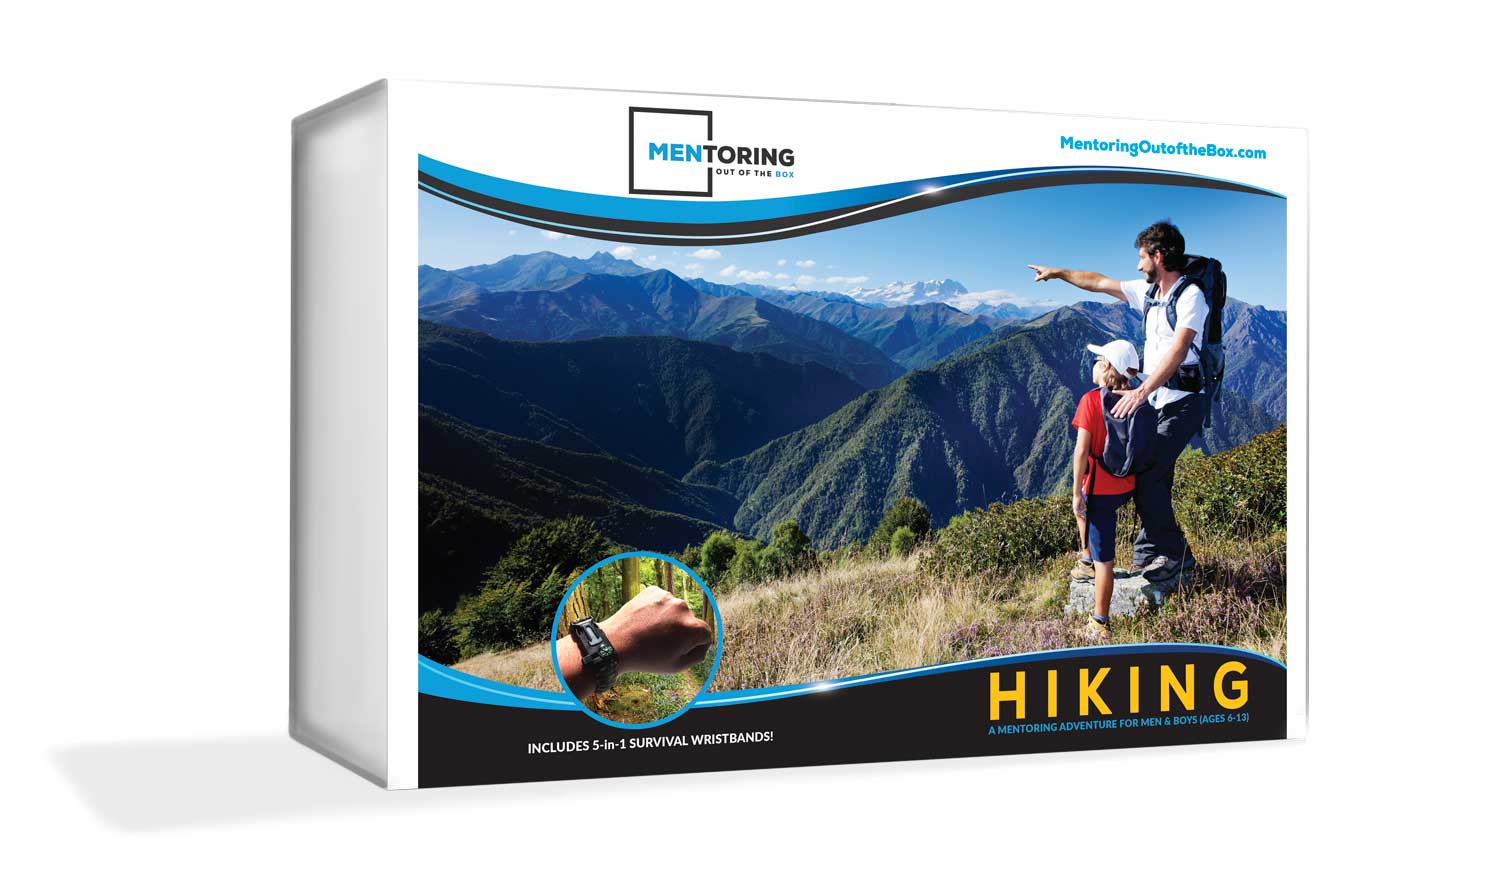 Mentoring out of the Box - Hiking Kit is for up to (5) boys to go on a hiking adventure!